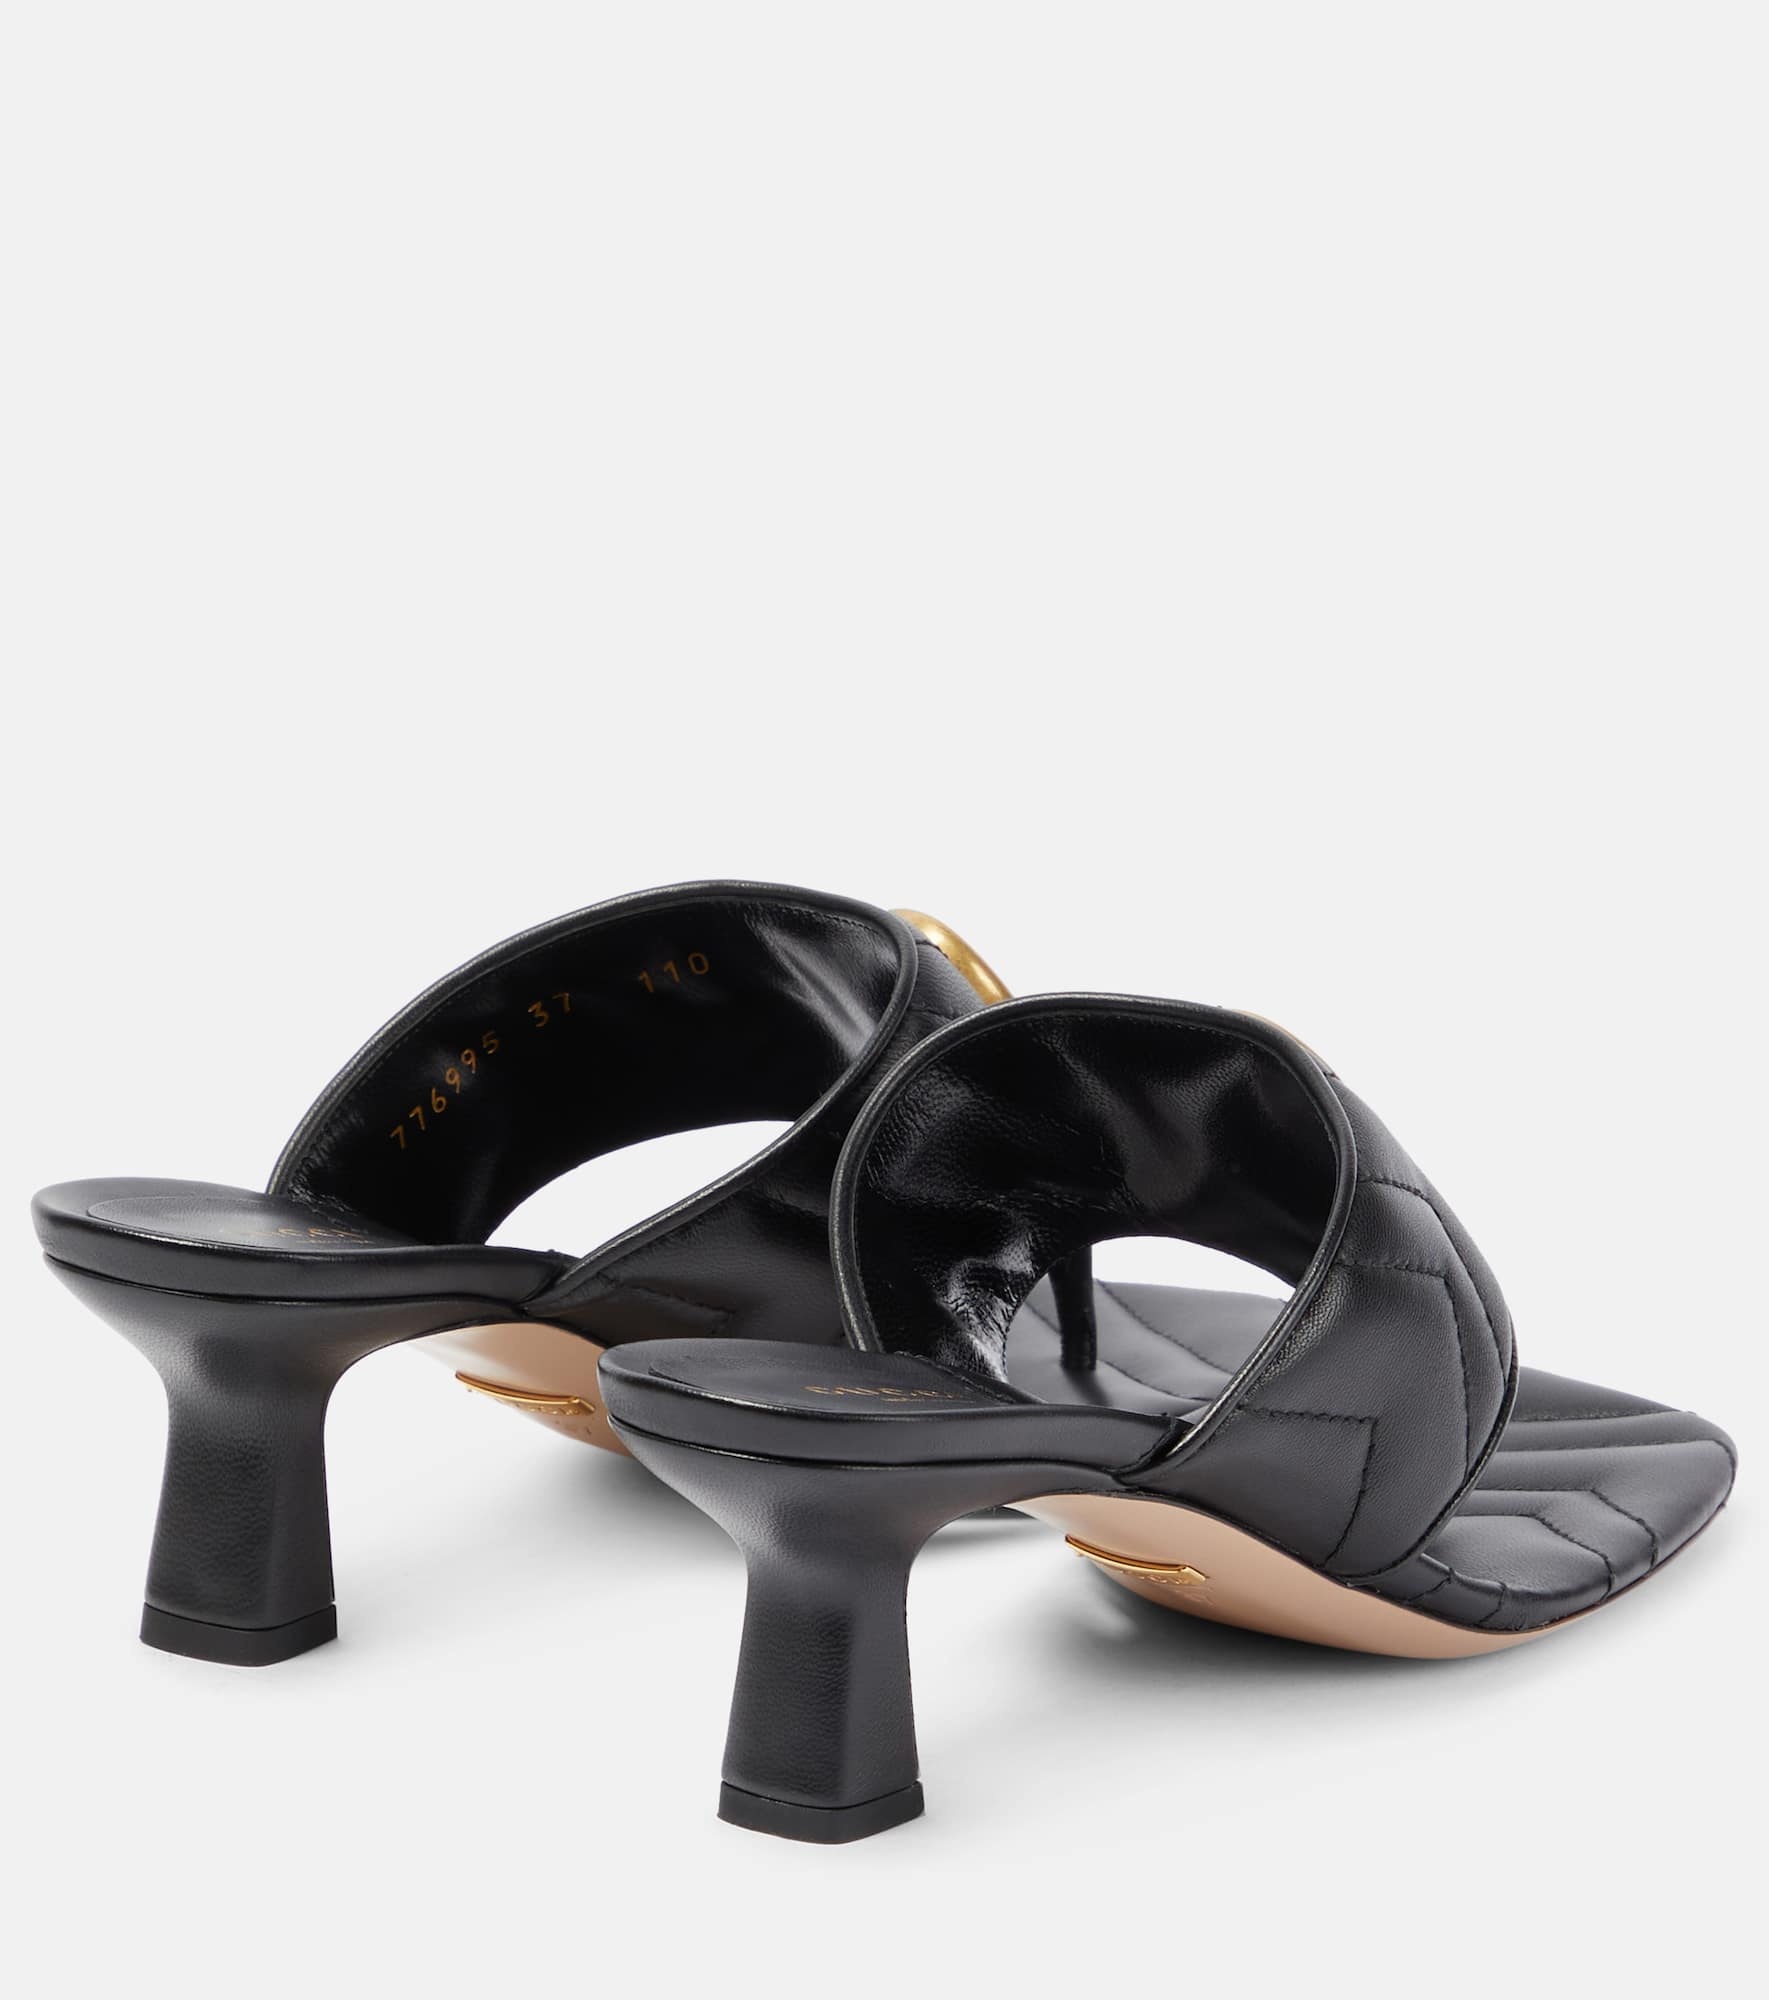 GG Marmont 55 leather thong sandals - 2